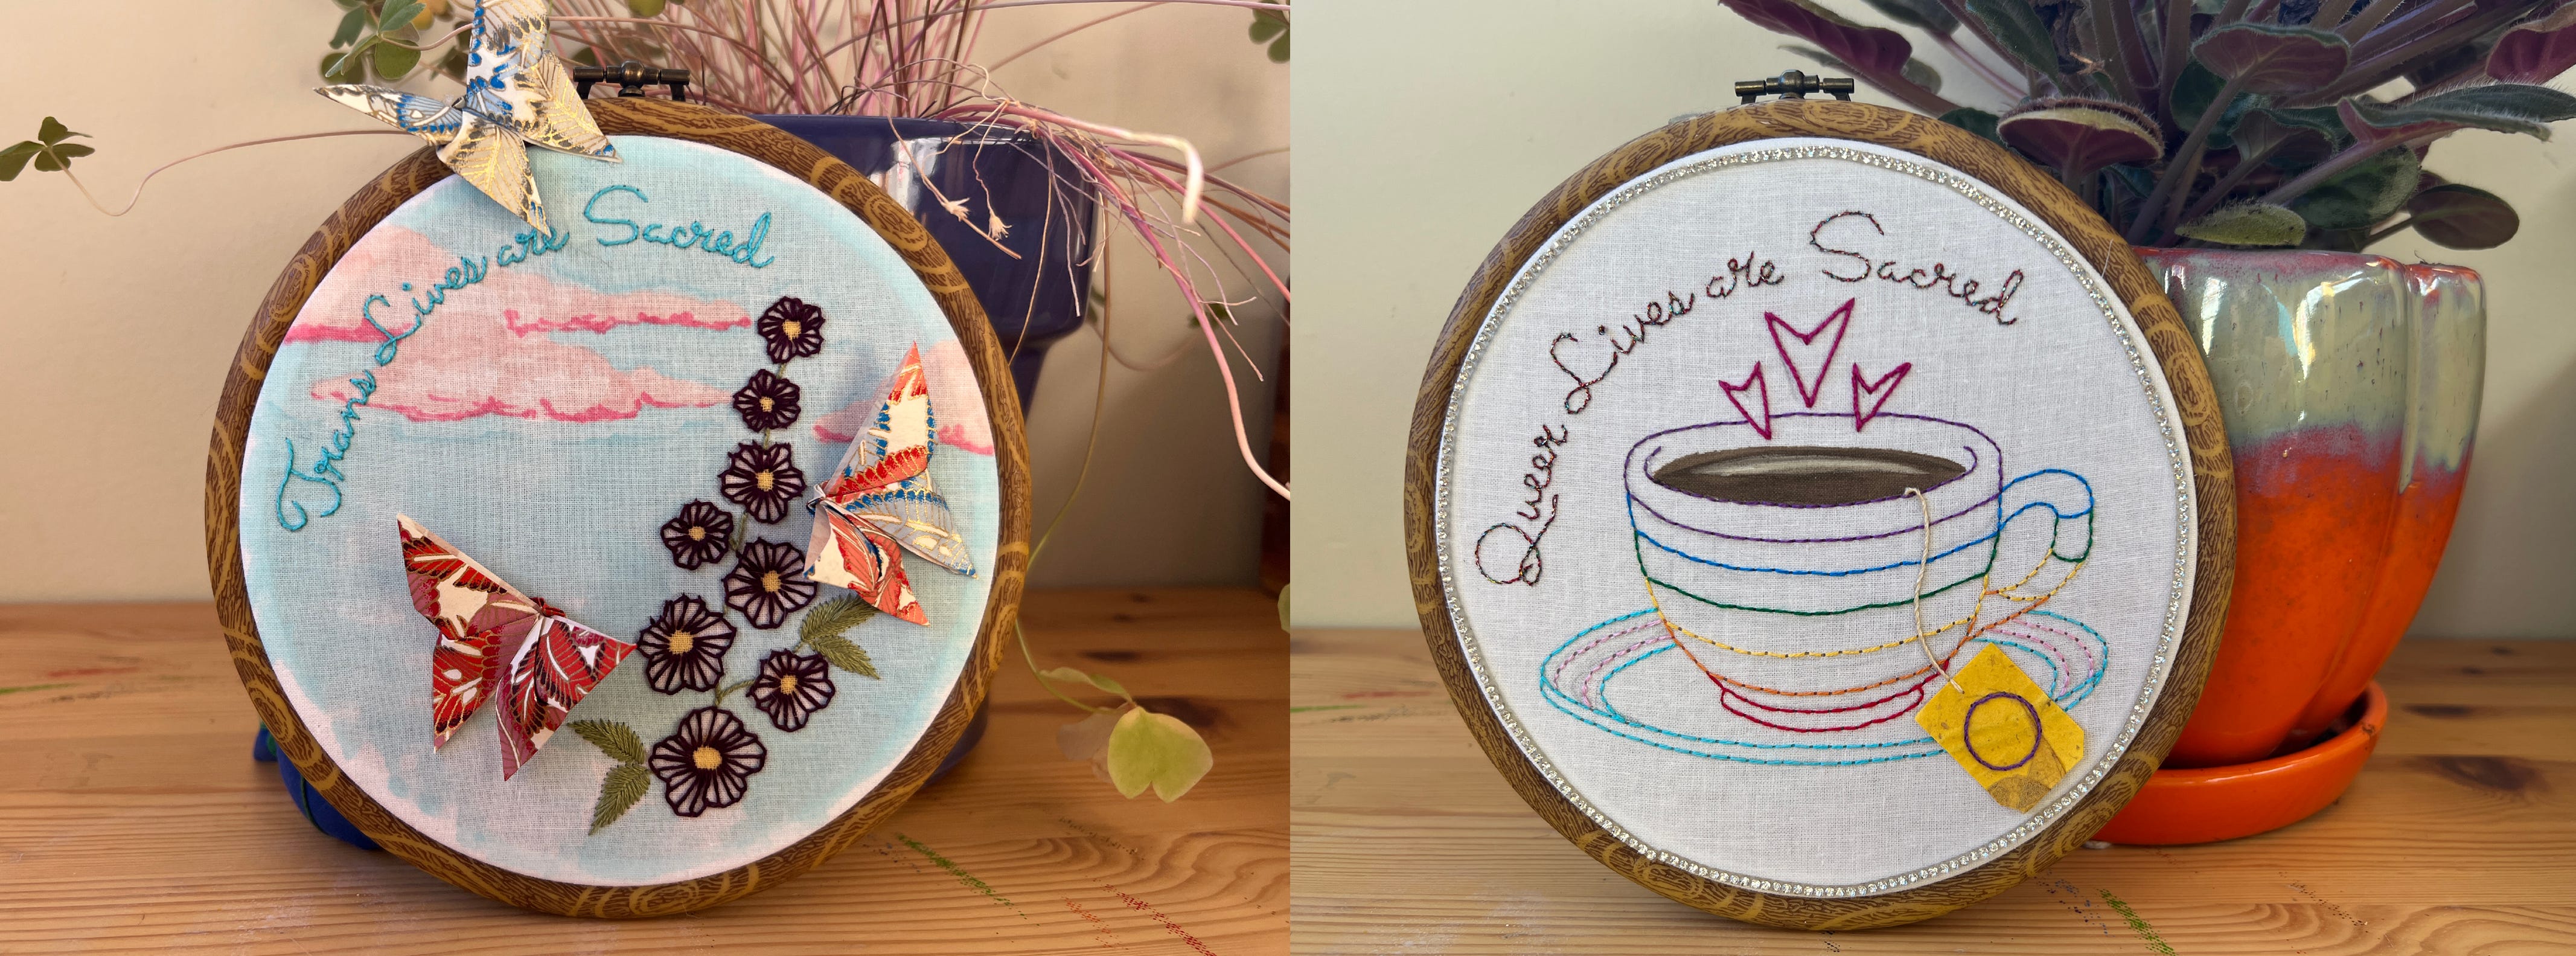 Two side-by-side photos of mixed-media embroidery pieces in round hoops. The image on the left shows a blue sky with pink clouds in marker with stitched flowers and origami butterflies. The text on this piece reads: "Trans Lives are Sacred." The piece on the right is of a teacup on a saucer with embroidered hearts rising from it like steam might. The cup is outlined in rainbow embroidery stripes and the saucer is outlined in trans pride colours. There is a tea tag hanging over the edge of the cup, which is made to look like the intersex pride flag. The text on this piece reads: "Queer Lives are Sacred." 